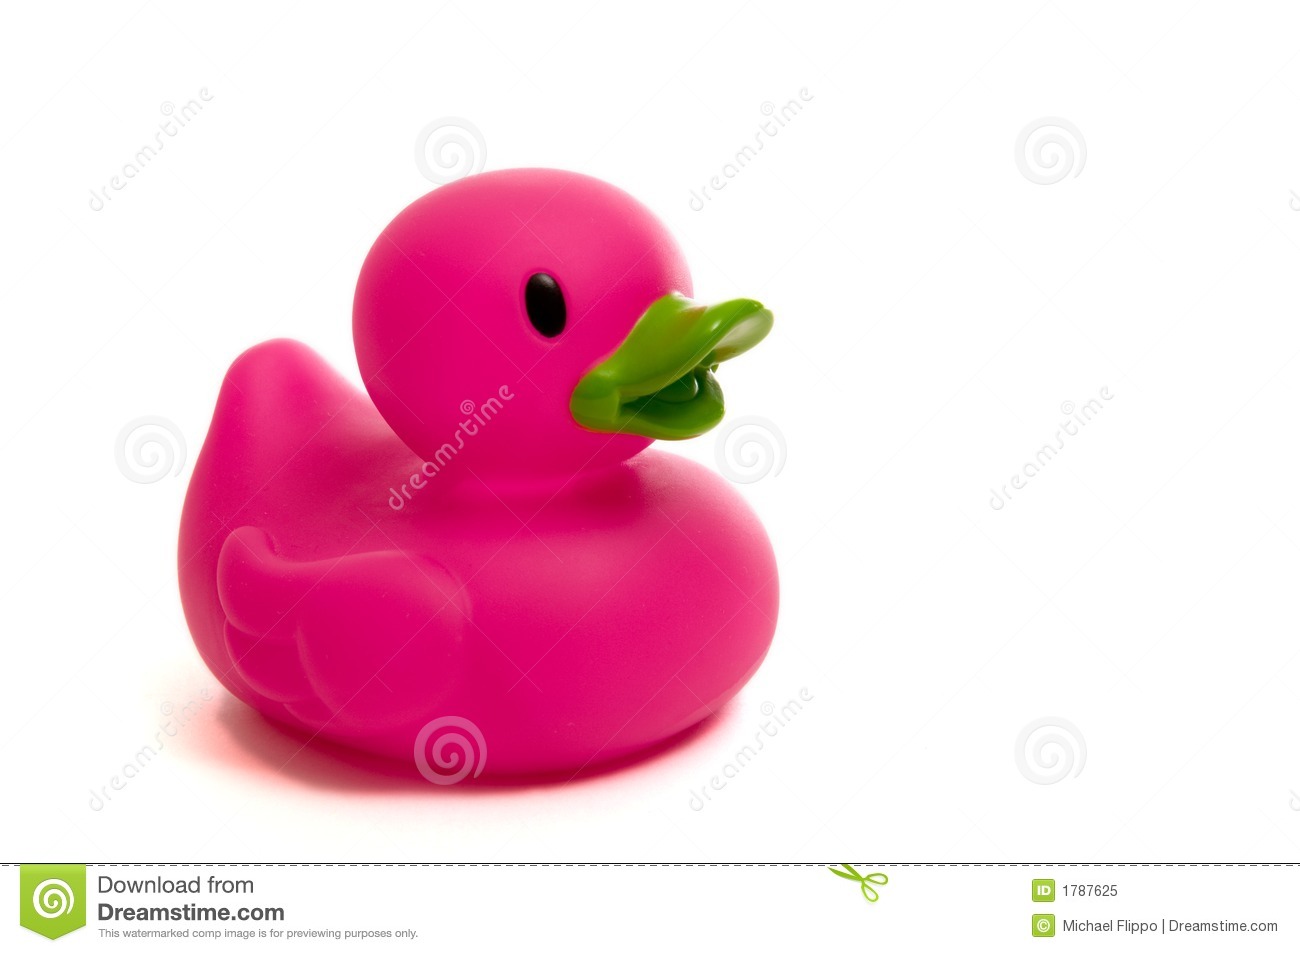 Purple Pink Rubber Duck On White Royalty Free Stock Photo   Image    